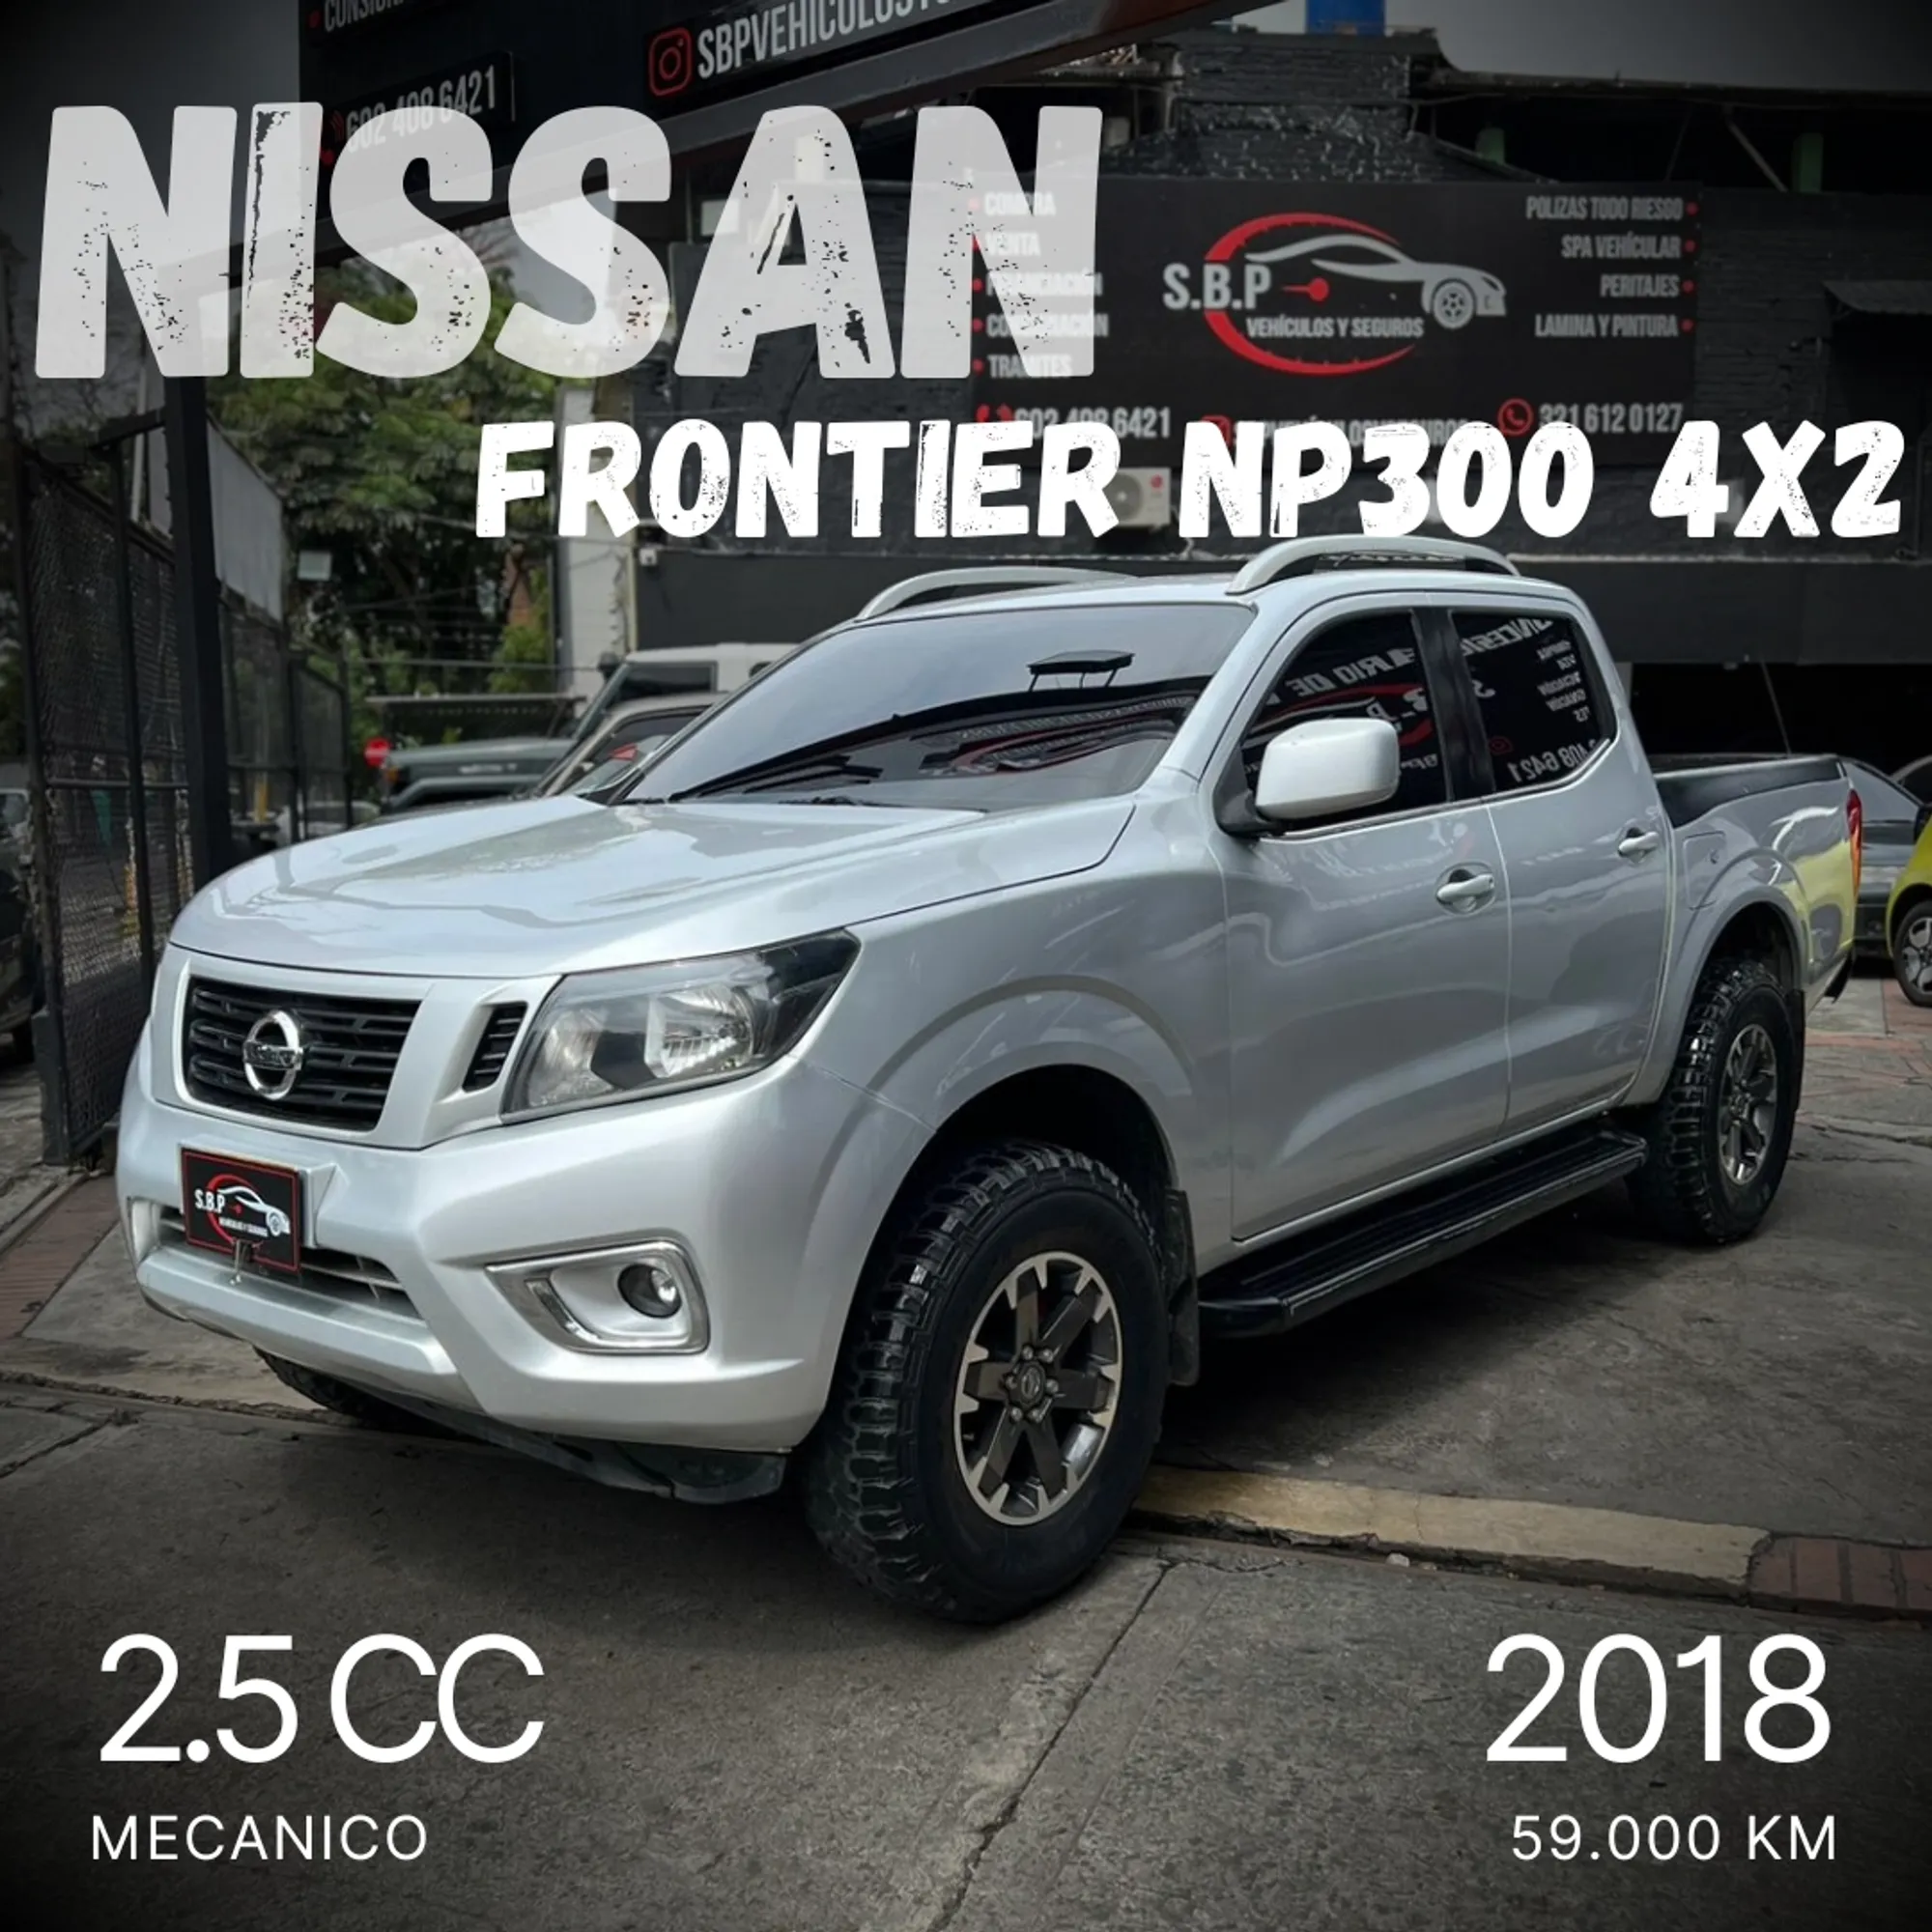 NISSAN FRONTIER NP300 2018 4x2 GASOLINA